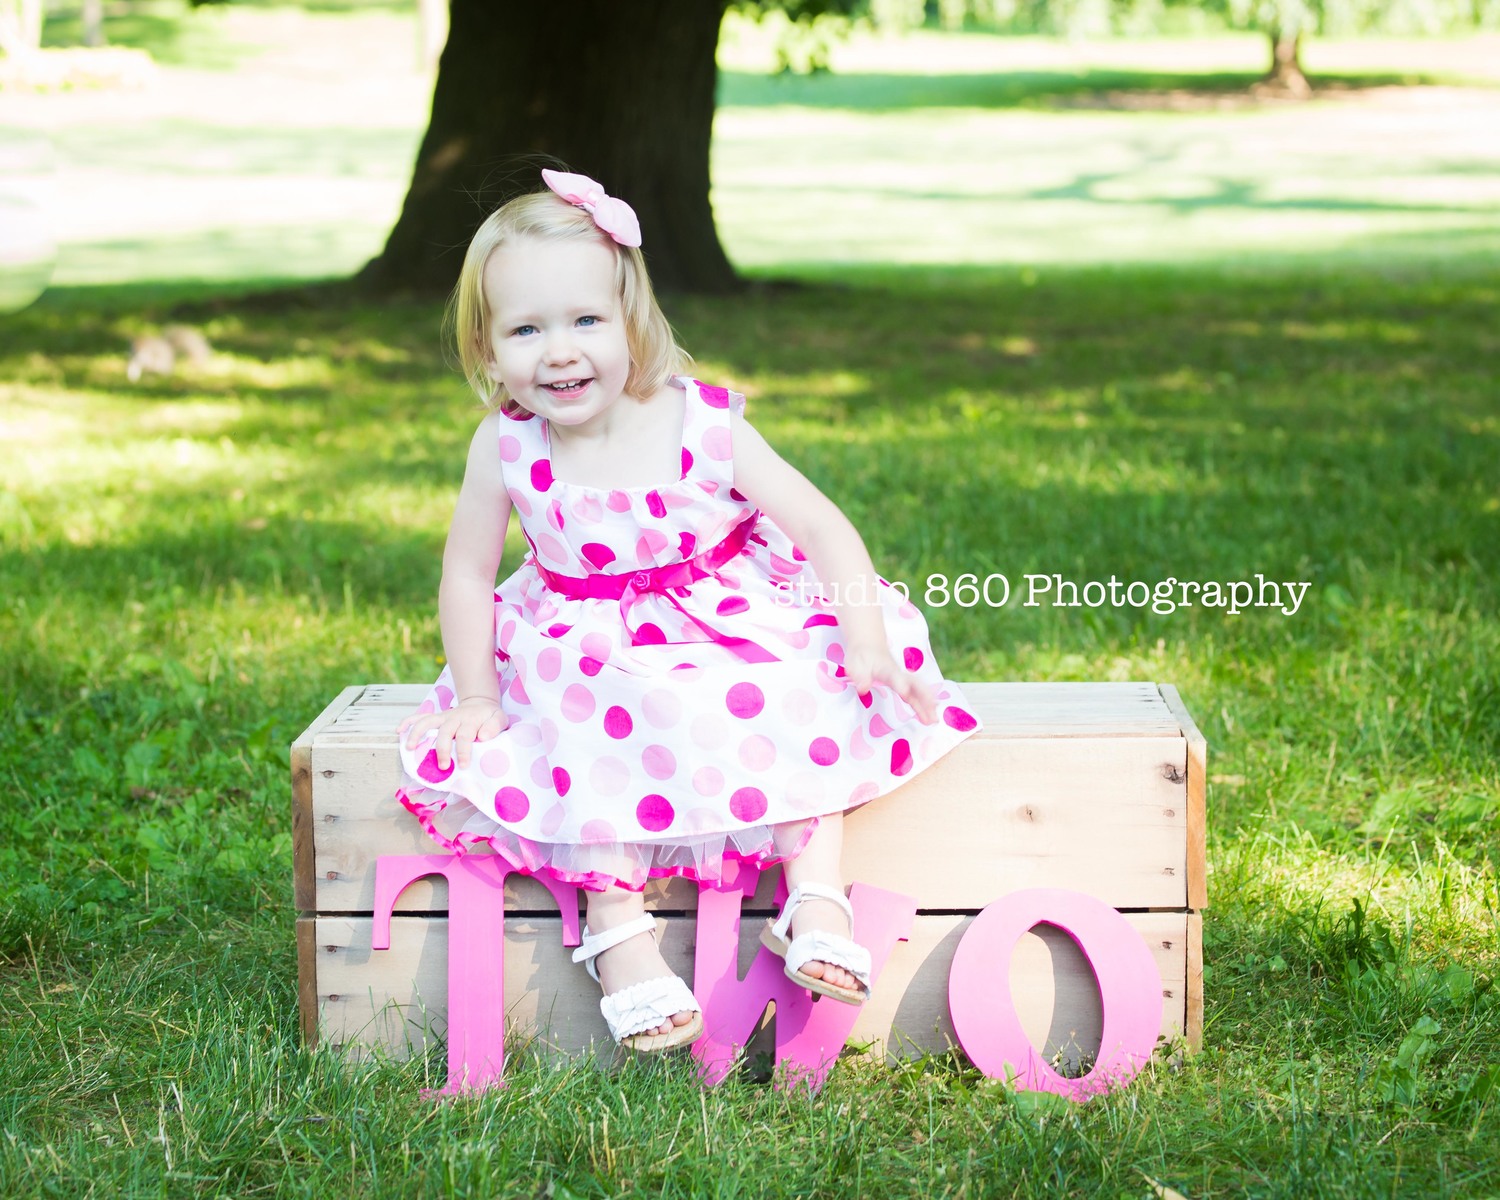 Two year old in the park. — Studio 860 Photography